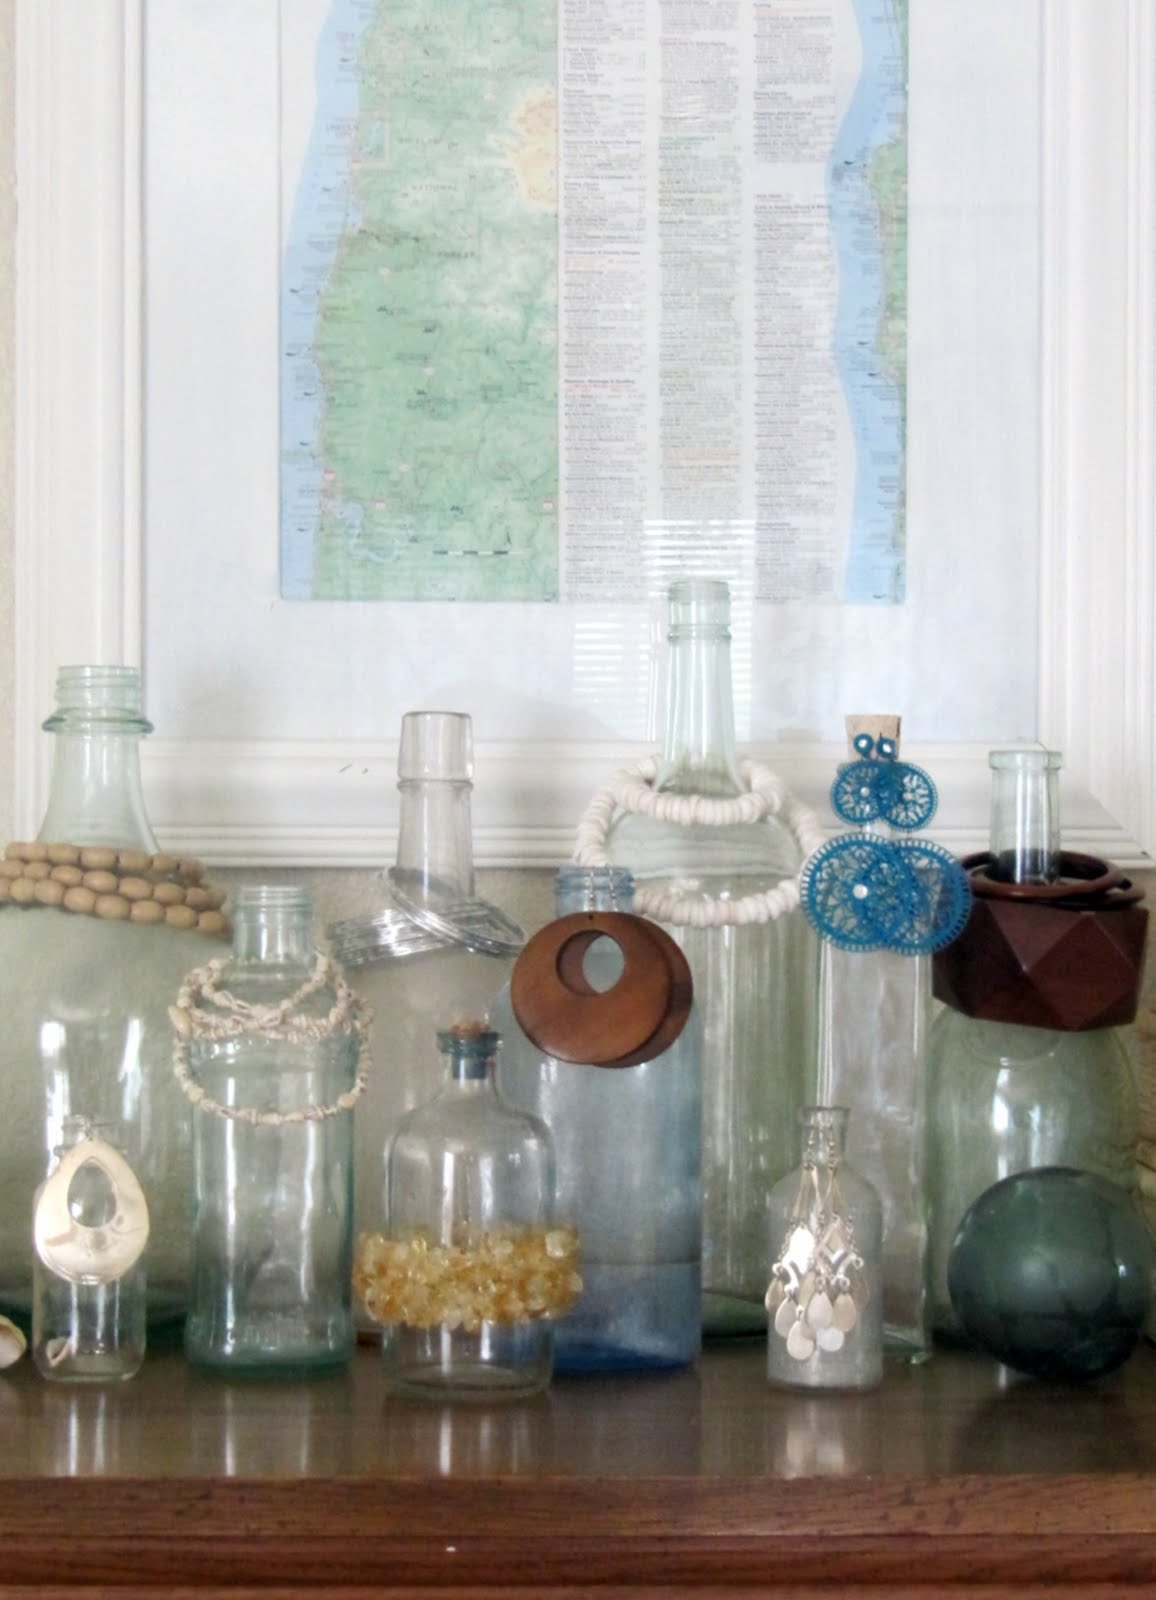 Displaying Jewelry With Bottles